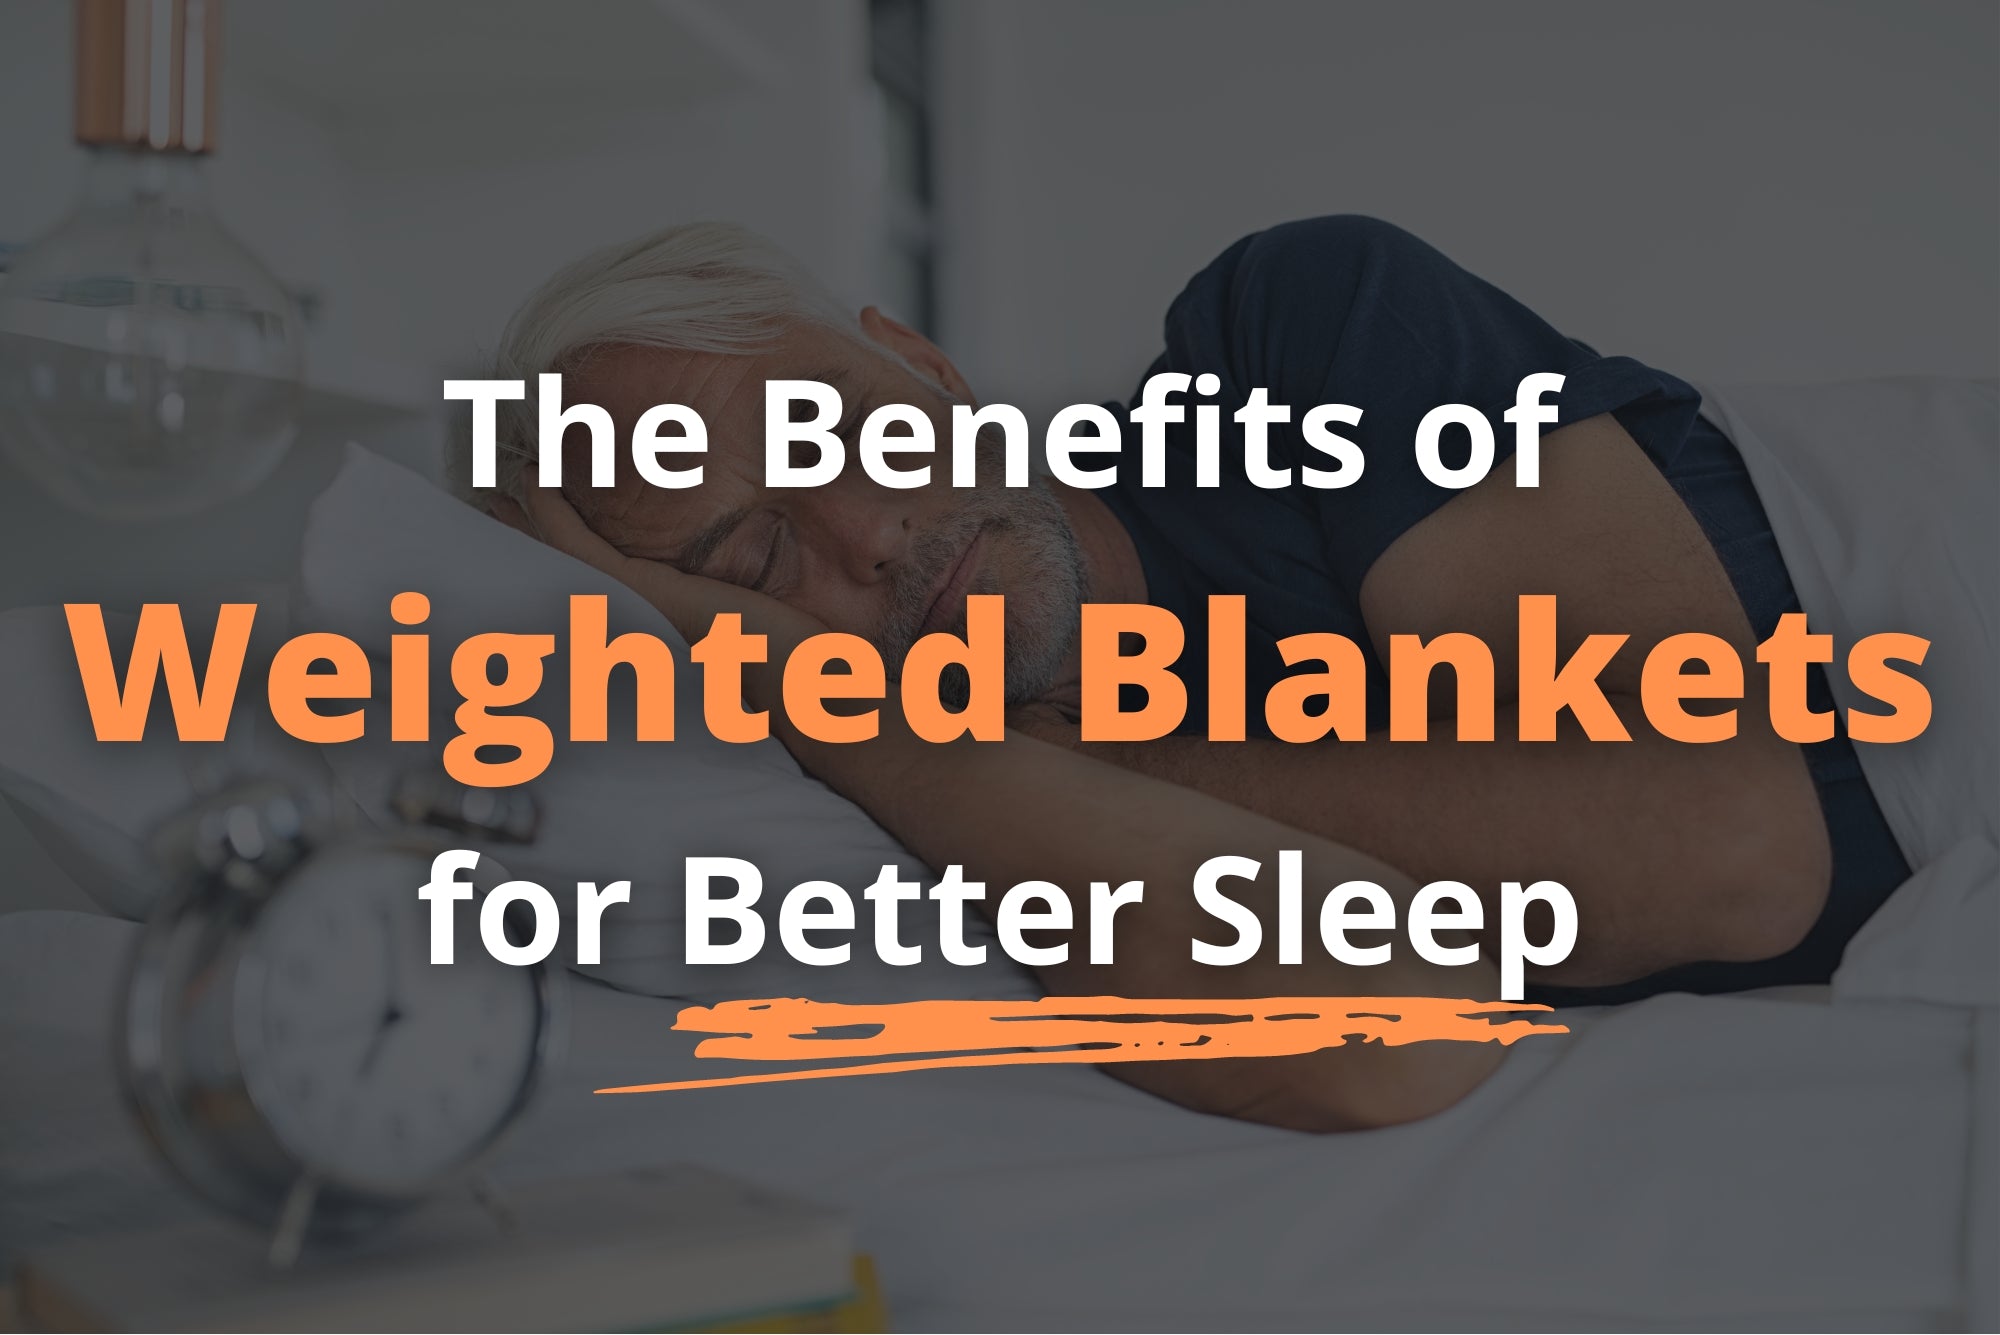 The Benefits of Weighted Blankets for Better Sleep